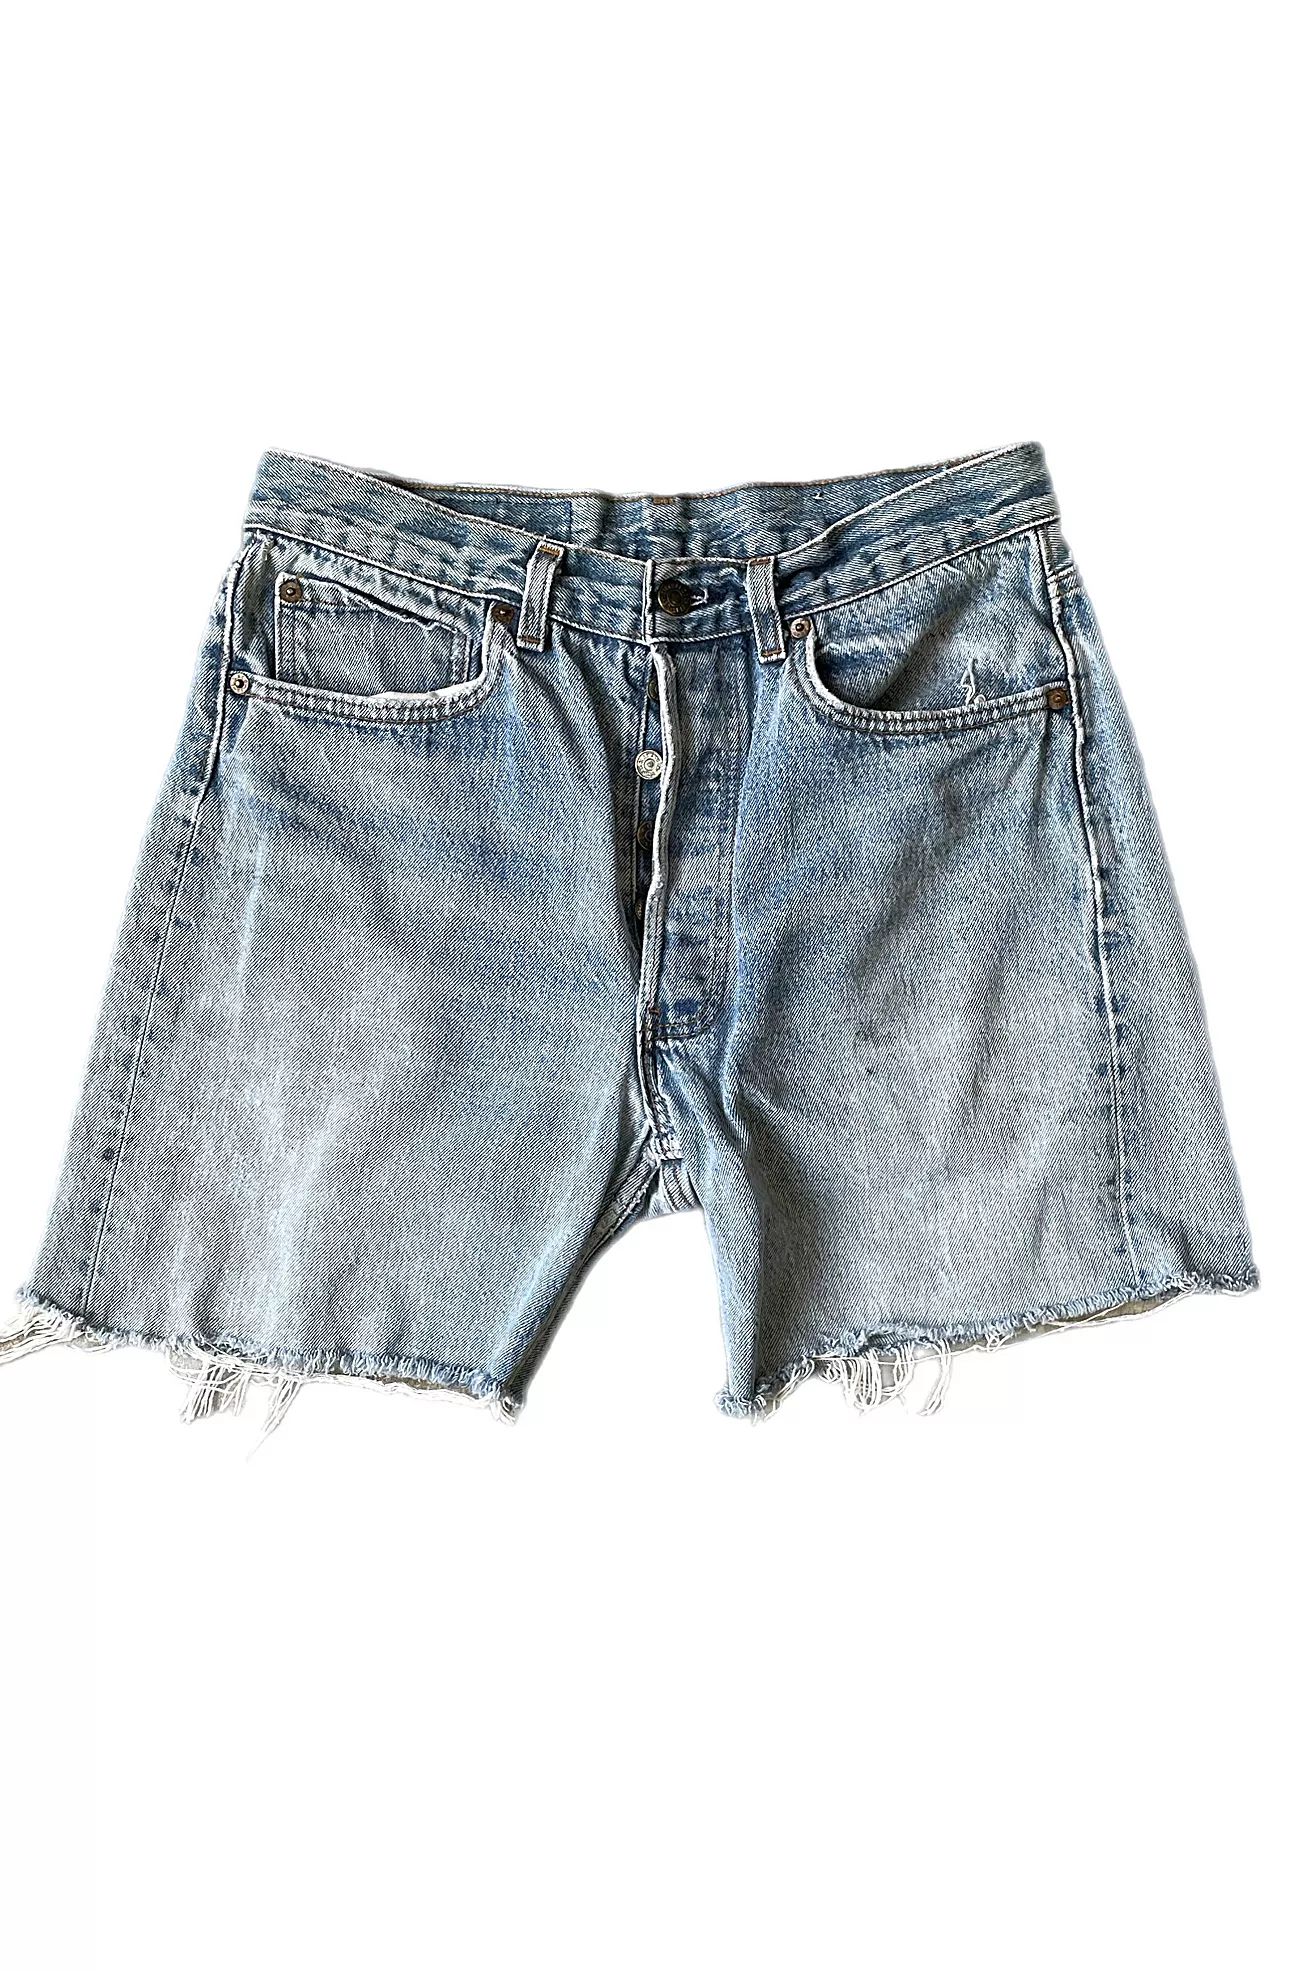 Vintage Levi's 501 Cutoff Button Fly Shorts Selected By Villains Vintage | Free People (Global - UK&FR Excluded)